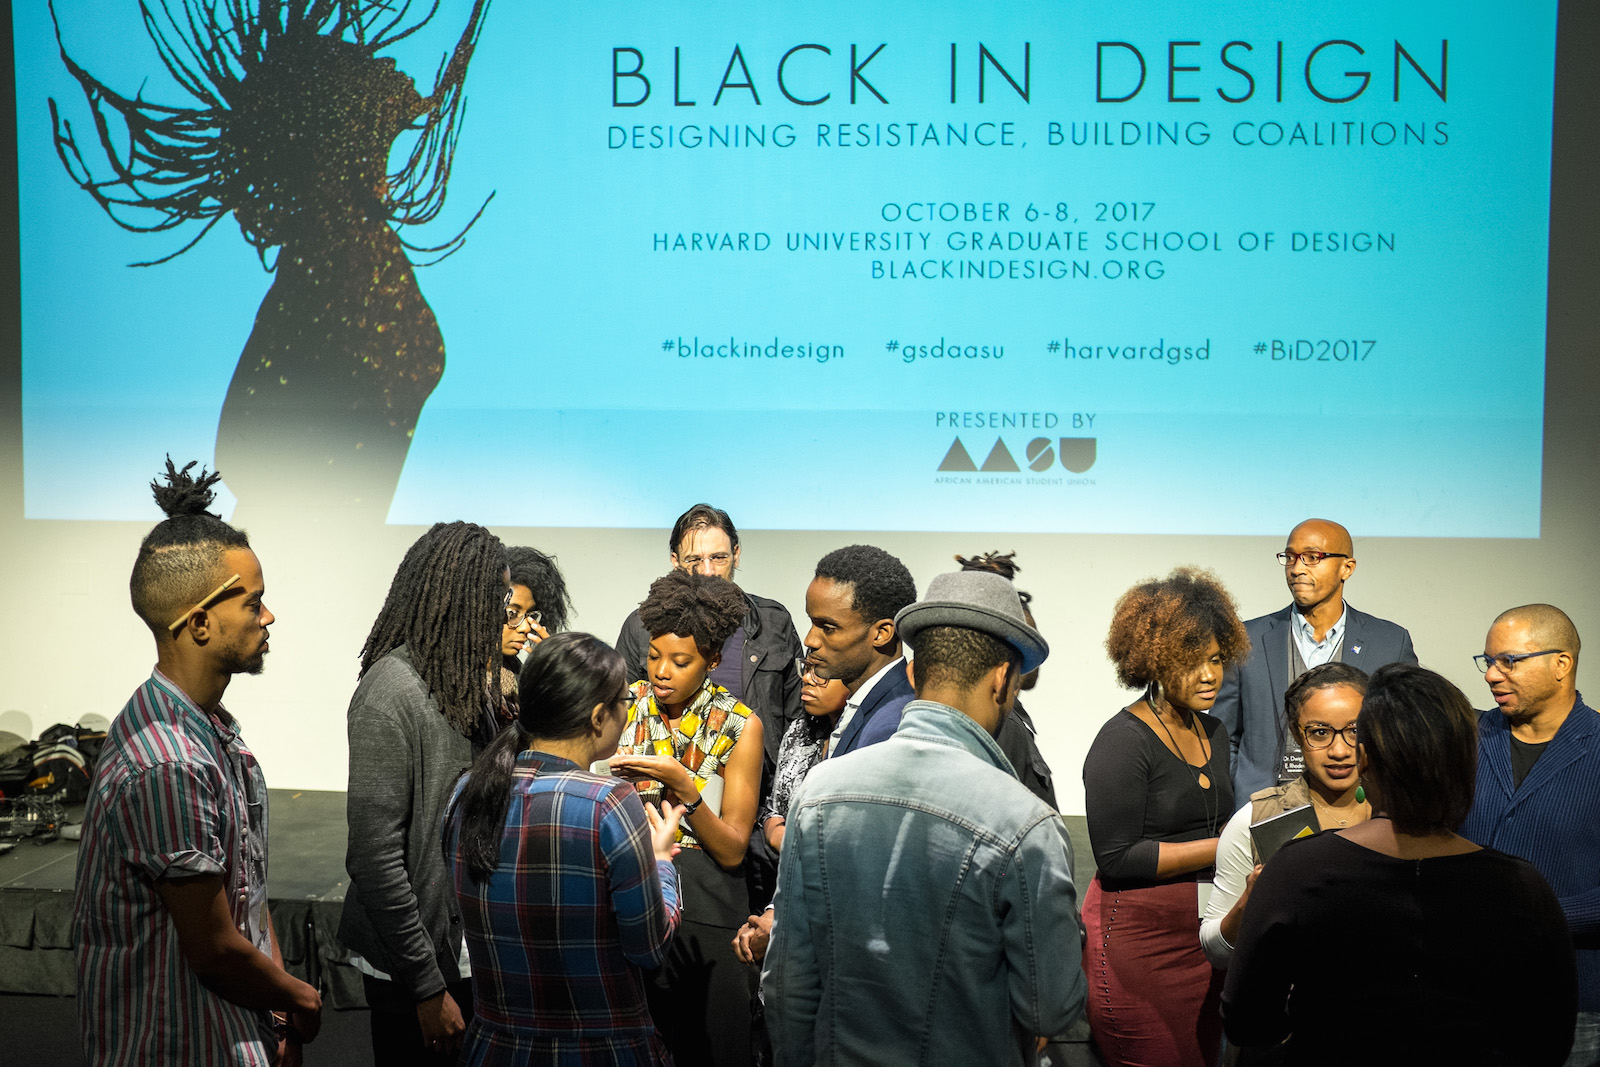 Black in Design Conference participants and audience members mingle between sessions.